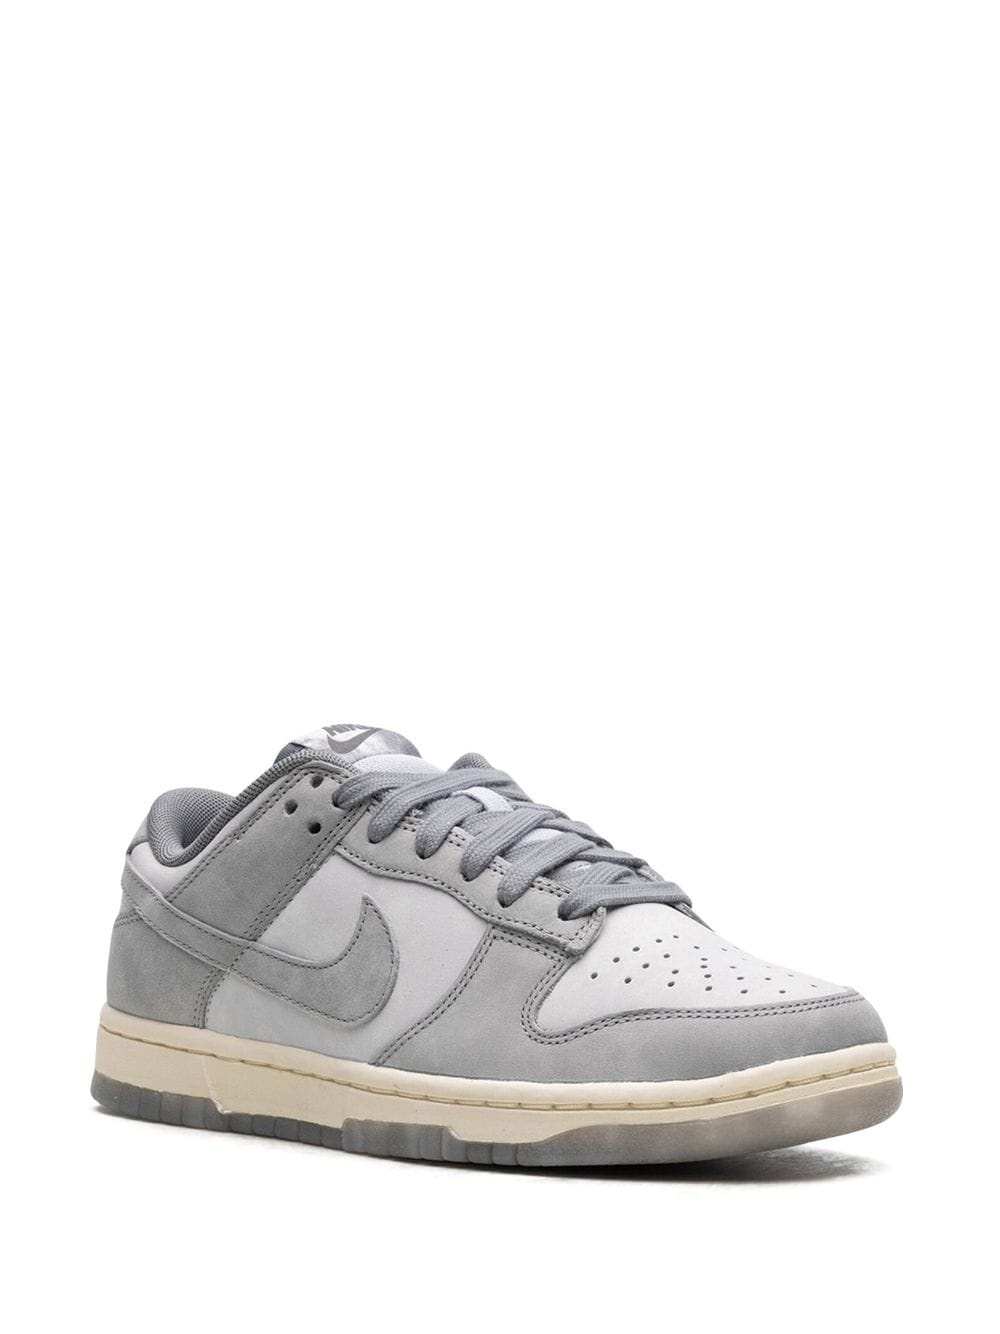 Dunk Low "Cool Grey" sneakers - 2